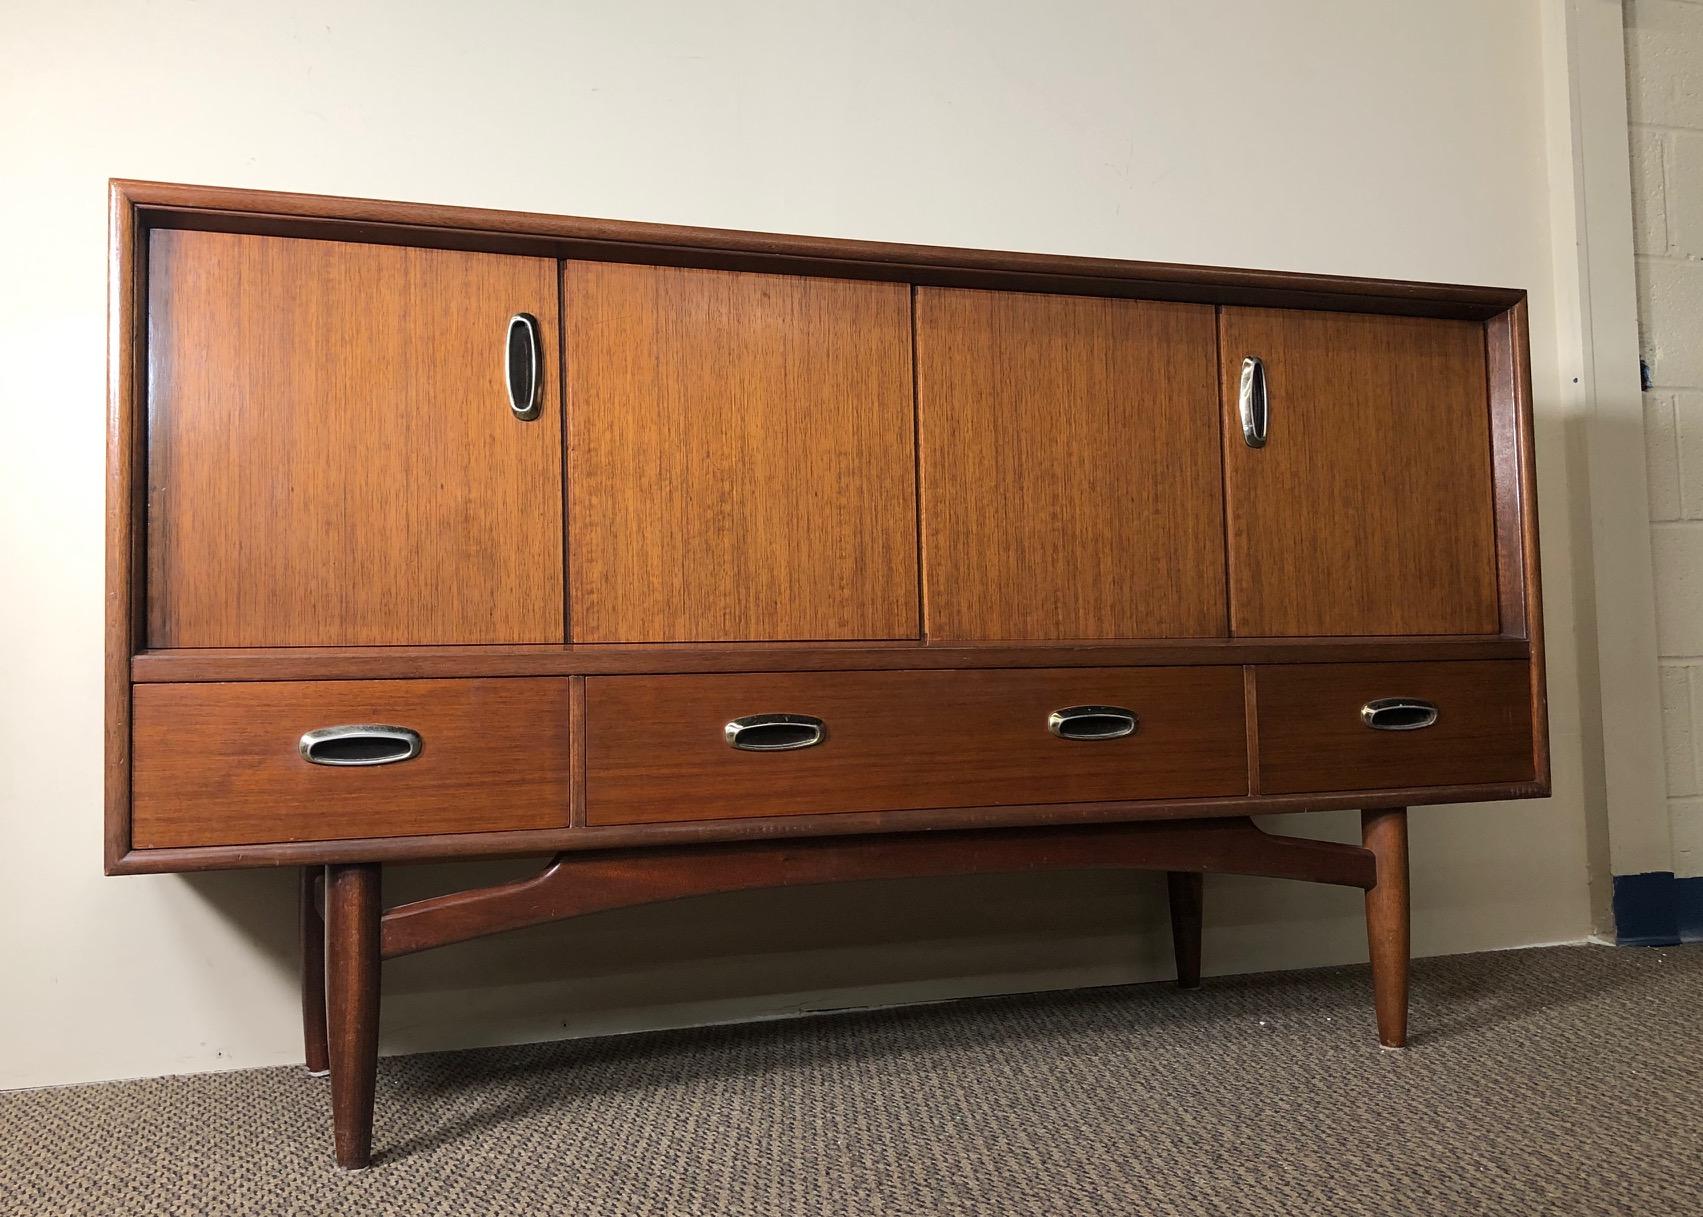 Stunning midcentury credenza by G Plan. Mahogany with metal pulls. Featuring unique folding doors with a fixed shelf inside. Three drawers all open and close easily. Clean interior. Original G Plan sticker in the middle drawer.
Excellent condition.